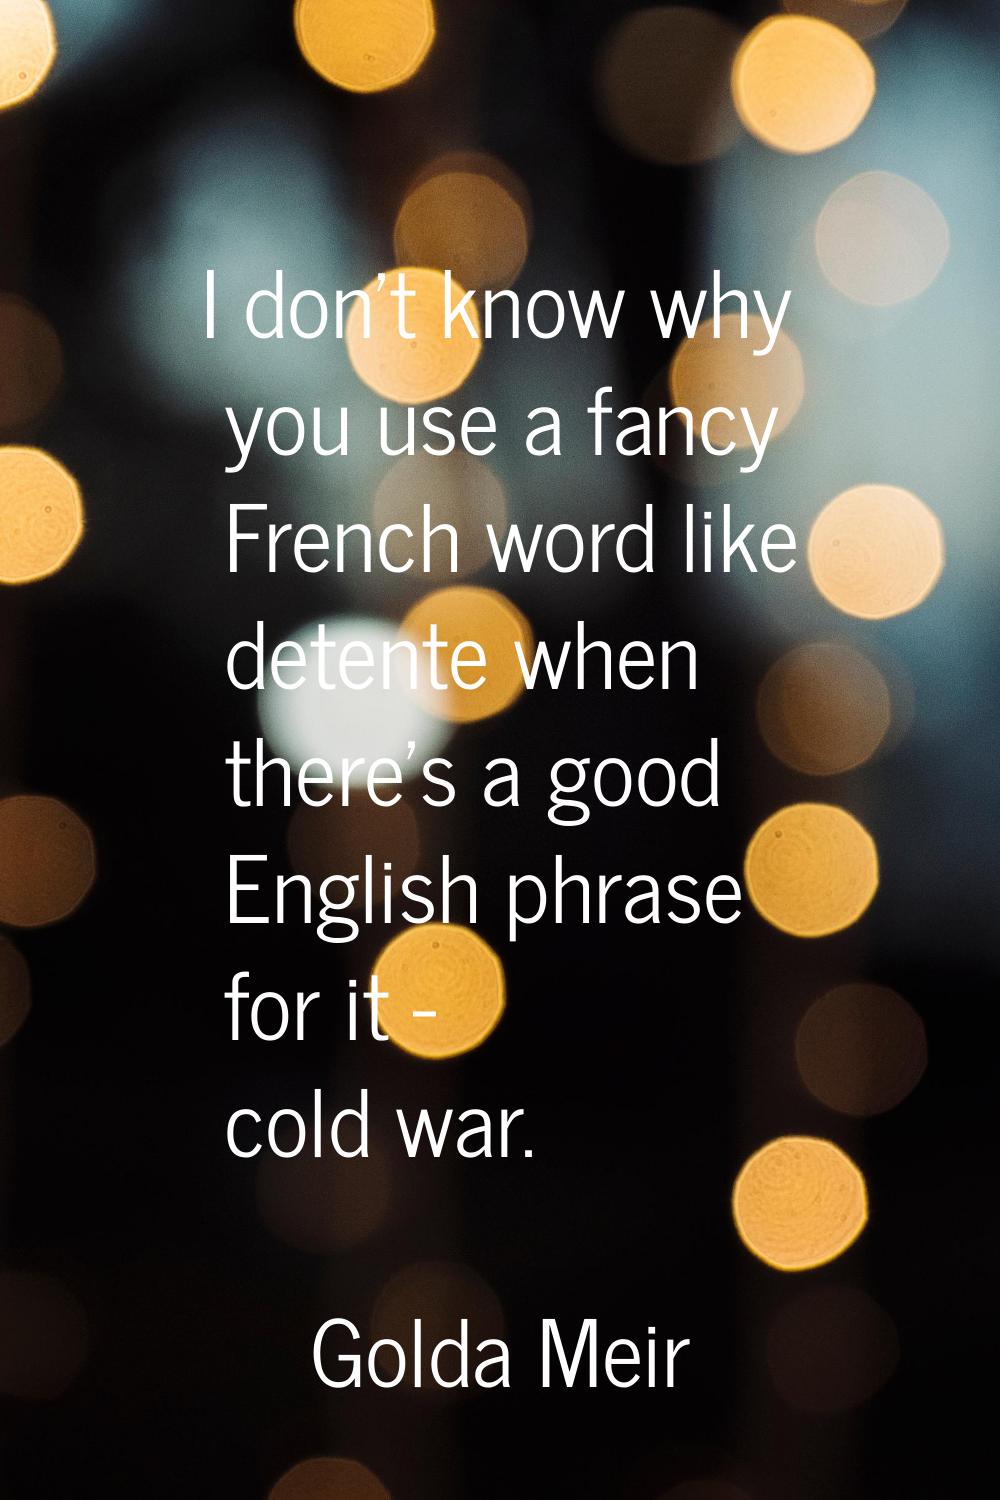 I don't know why you use a fancy French word like detente when there's a good English phrase for it